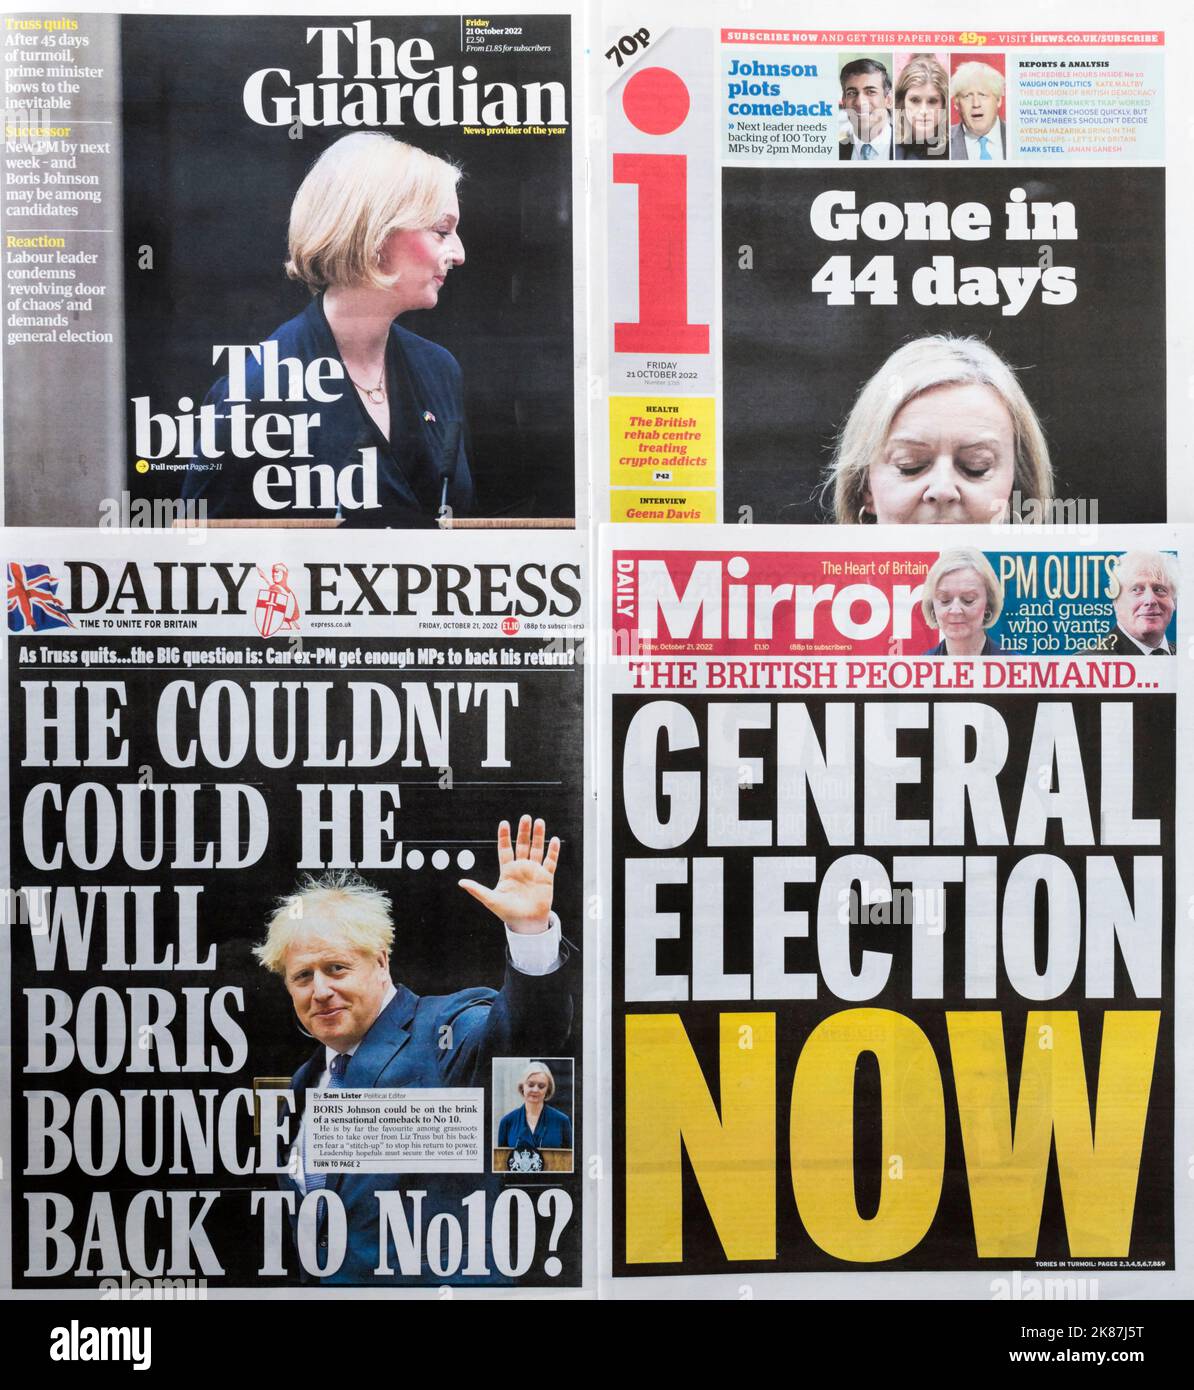 21 October 2022. A selection of newspaper front page headlines following the resignation of Liz Truss as Prime Minister and leader of the Conservative party the previous day. Stock Photo